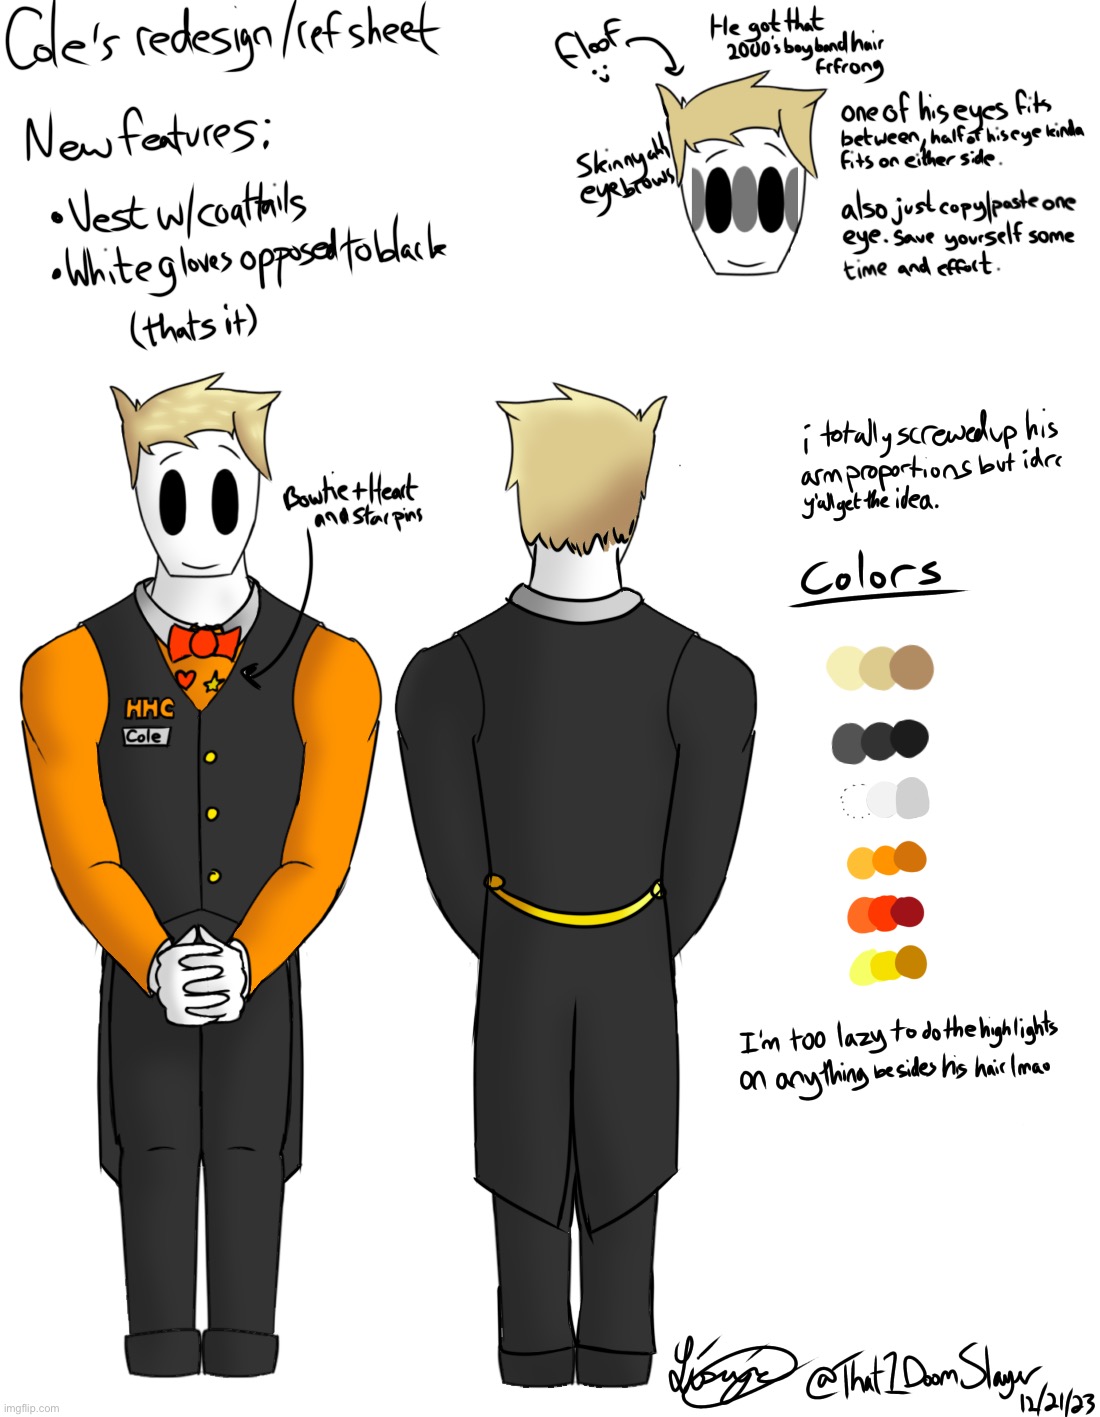 Yknow when i actually think about it this is the only proper ref sheet ive made for any oc | image tagged in ocs,digital art,yippee | made w/ Imgflip meme maker